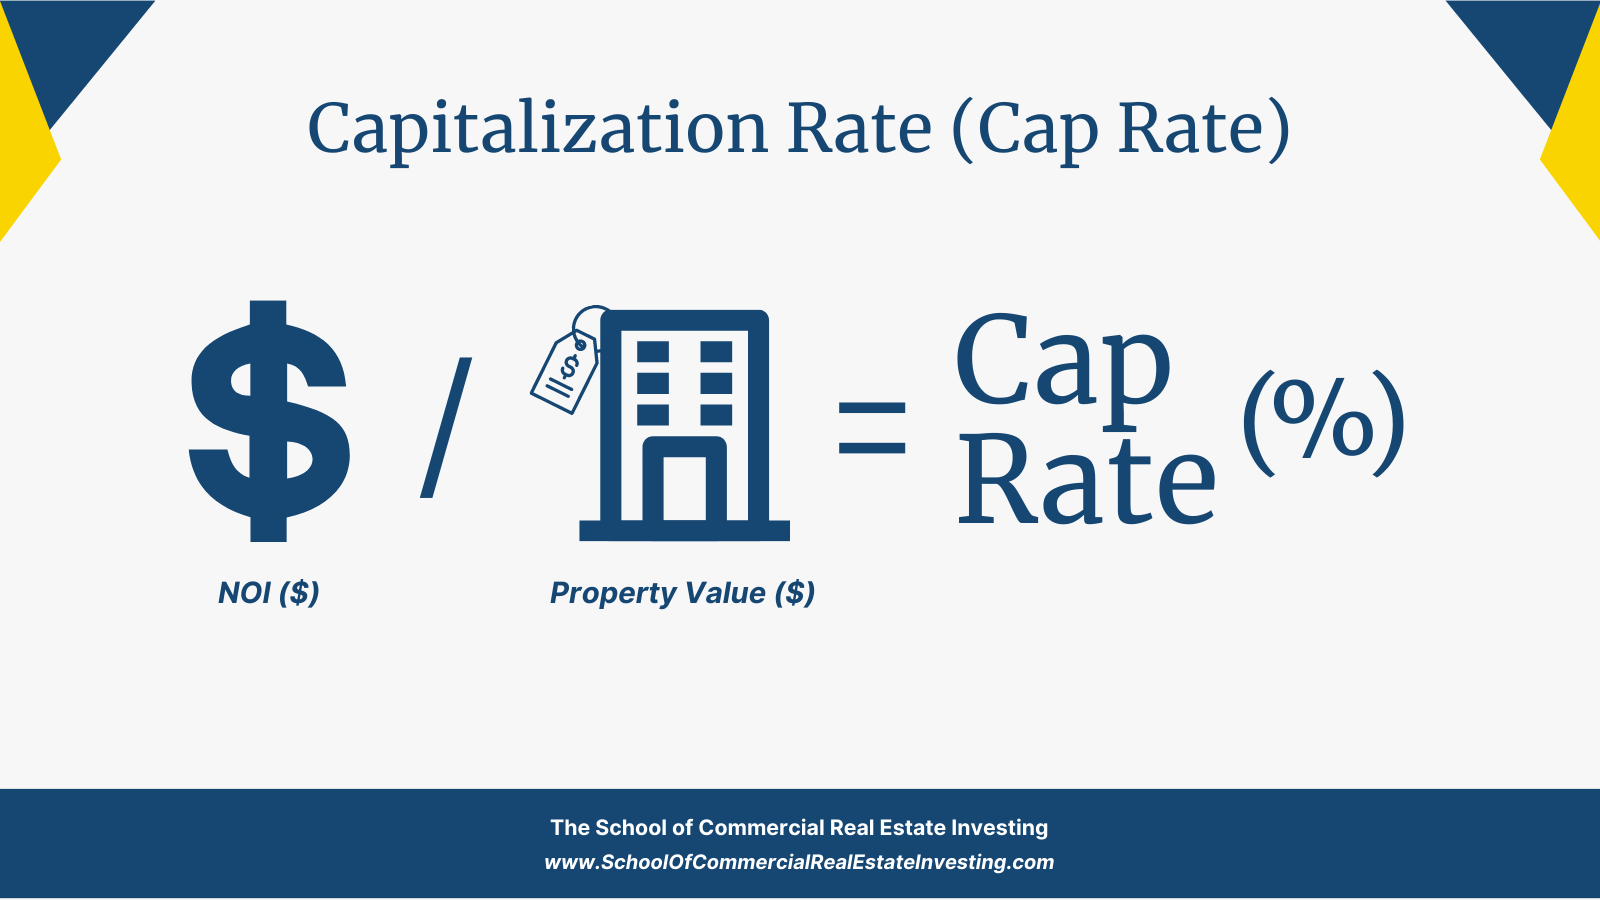 Calculate the Capitalization Rate (Cap Rate) by dividing the NOI by the Property Value.